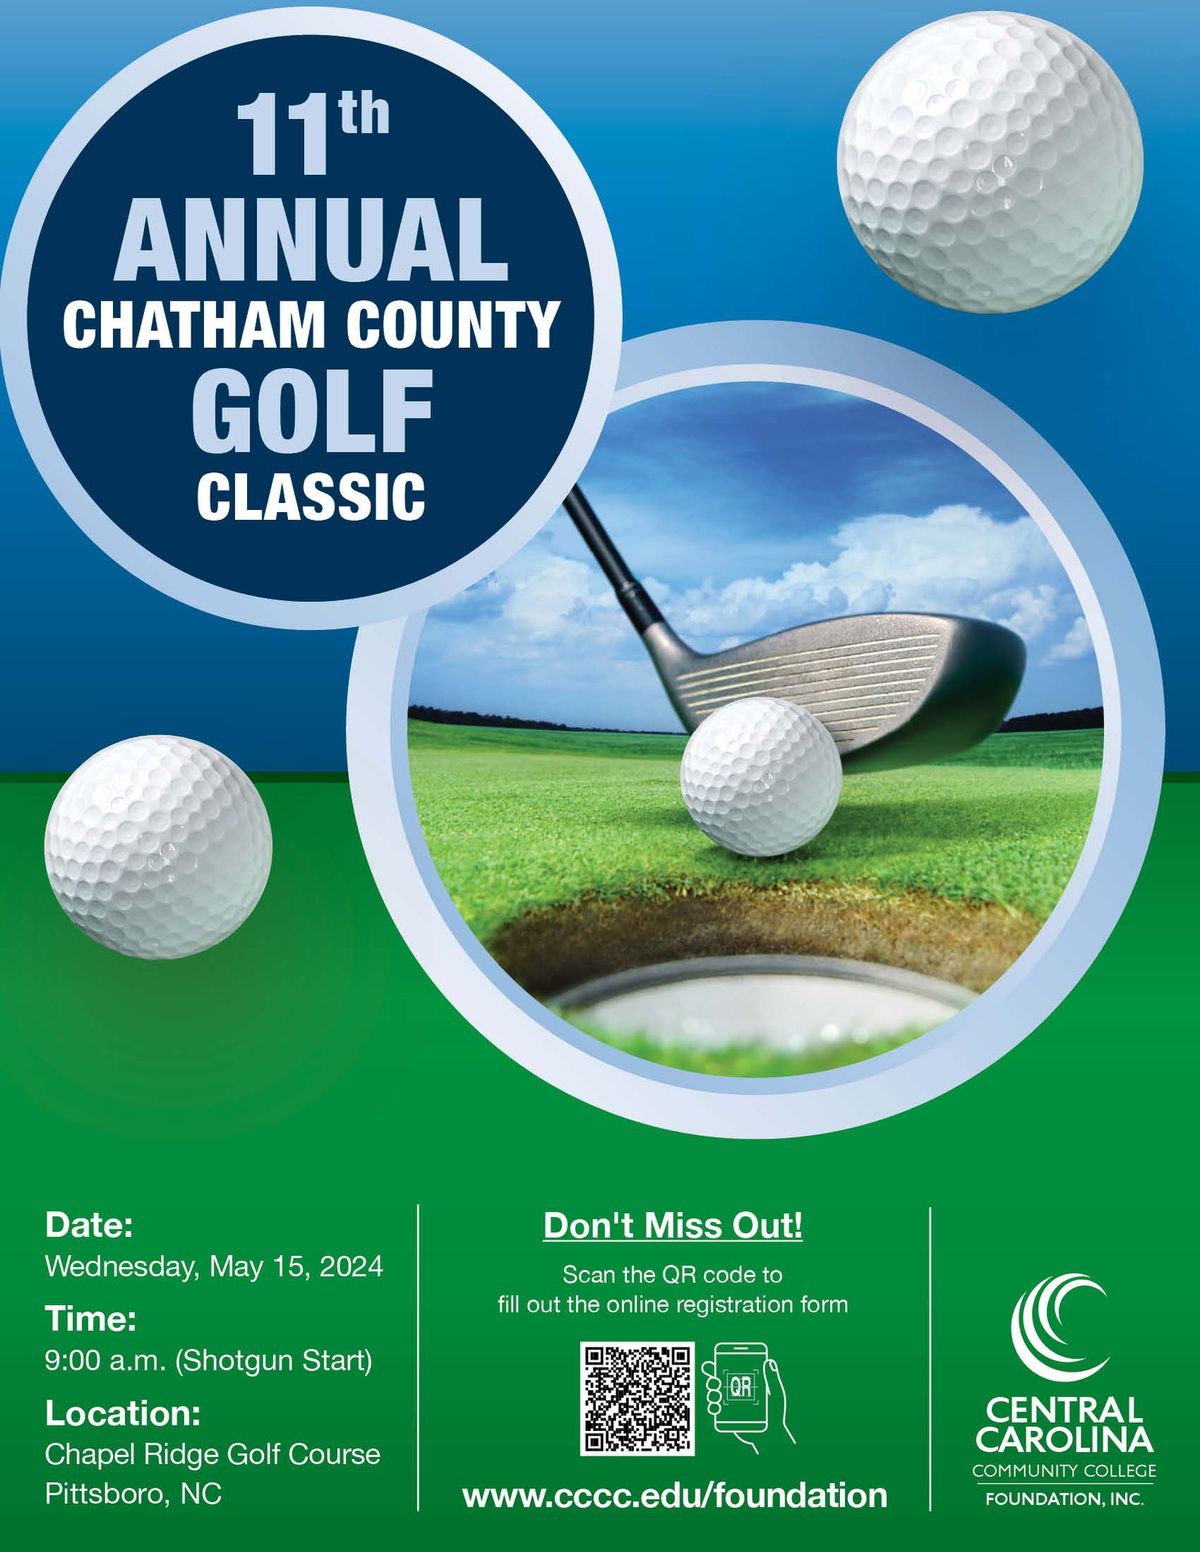 11th Annual CCCC Foundation Chatham County Golf Classic